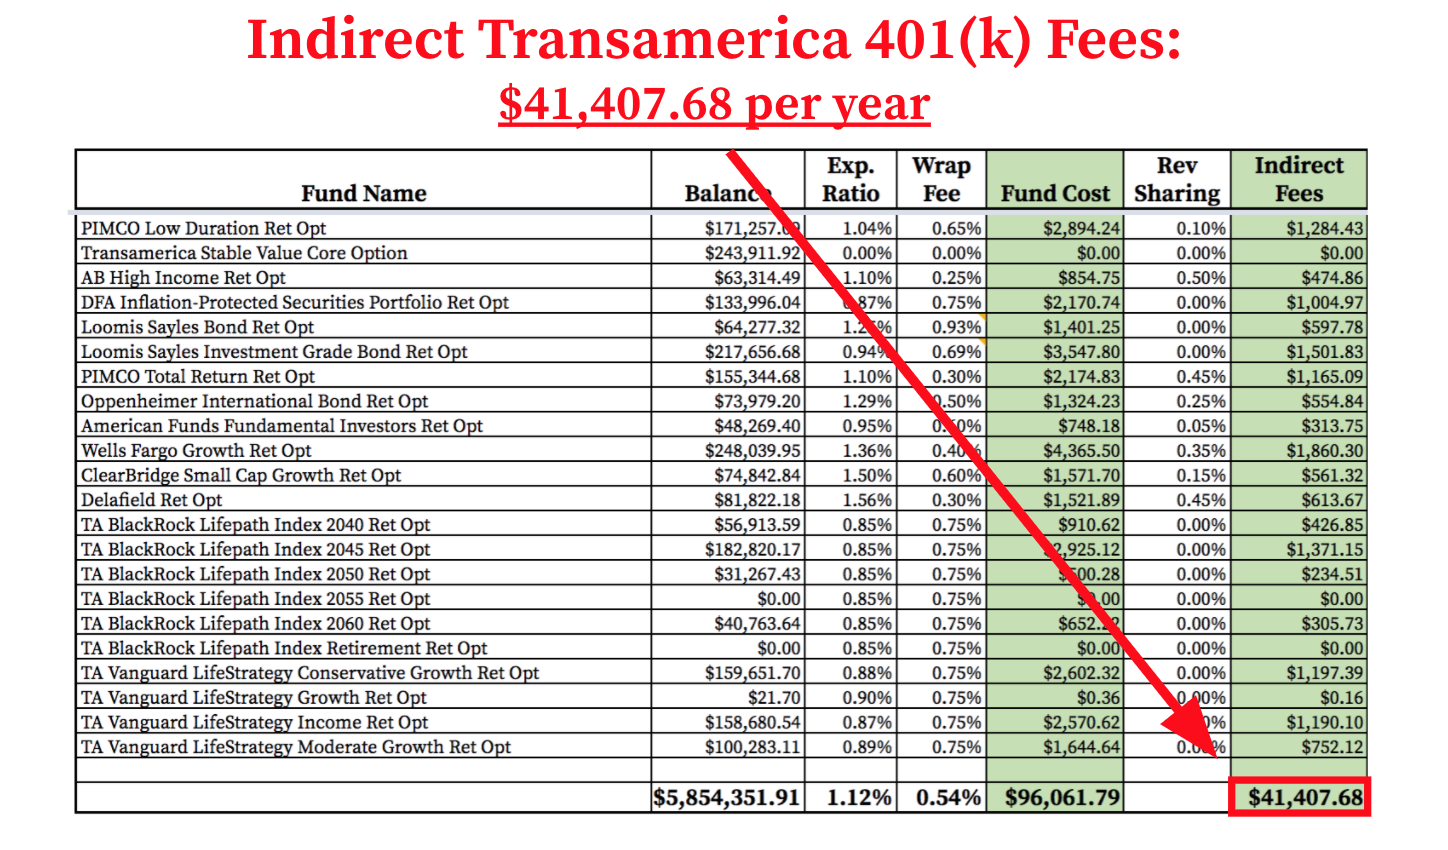 table displaying indirect transamerica 401(k) fees in red